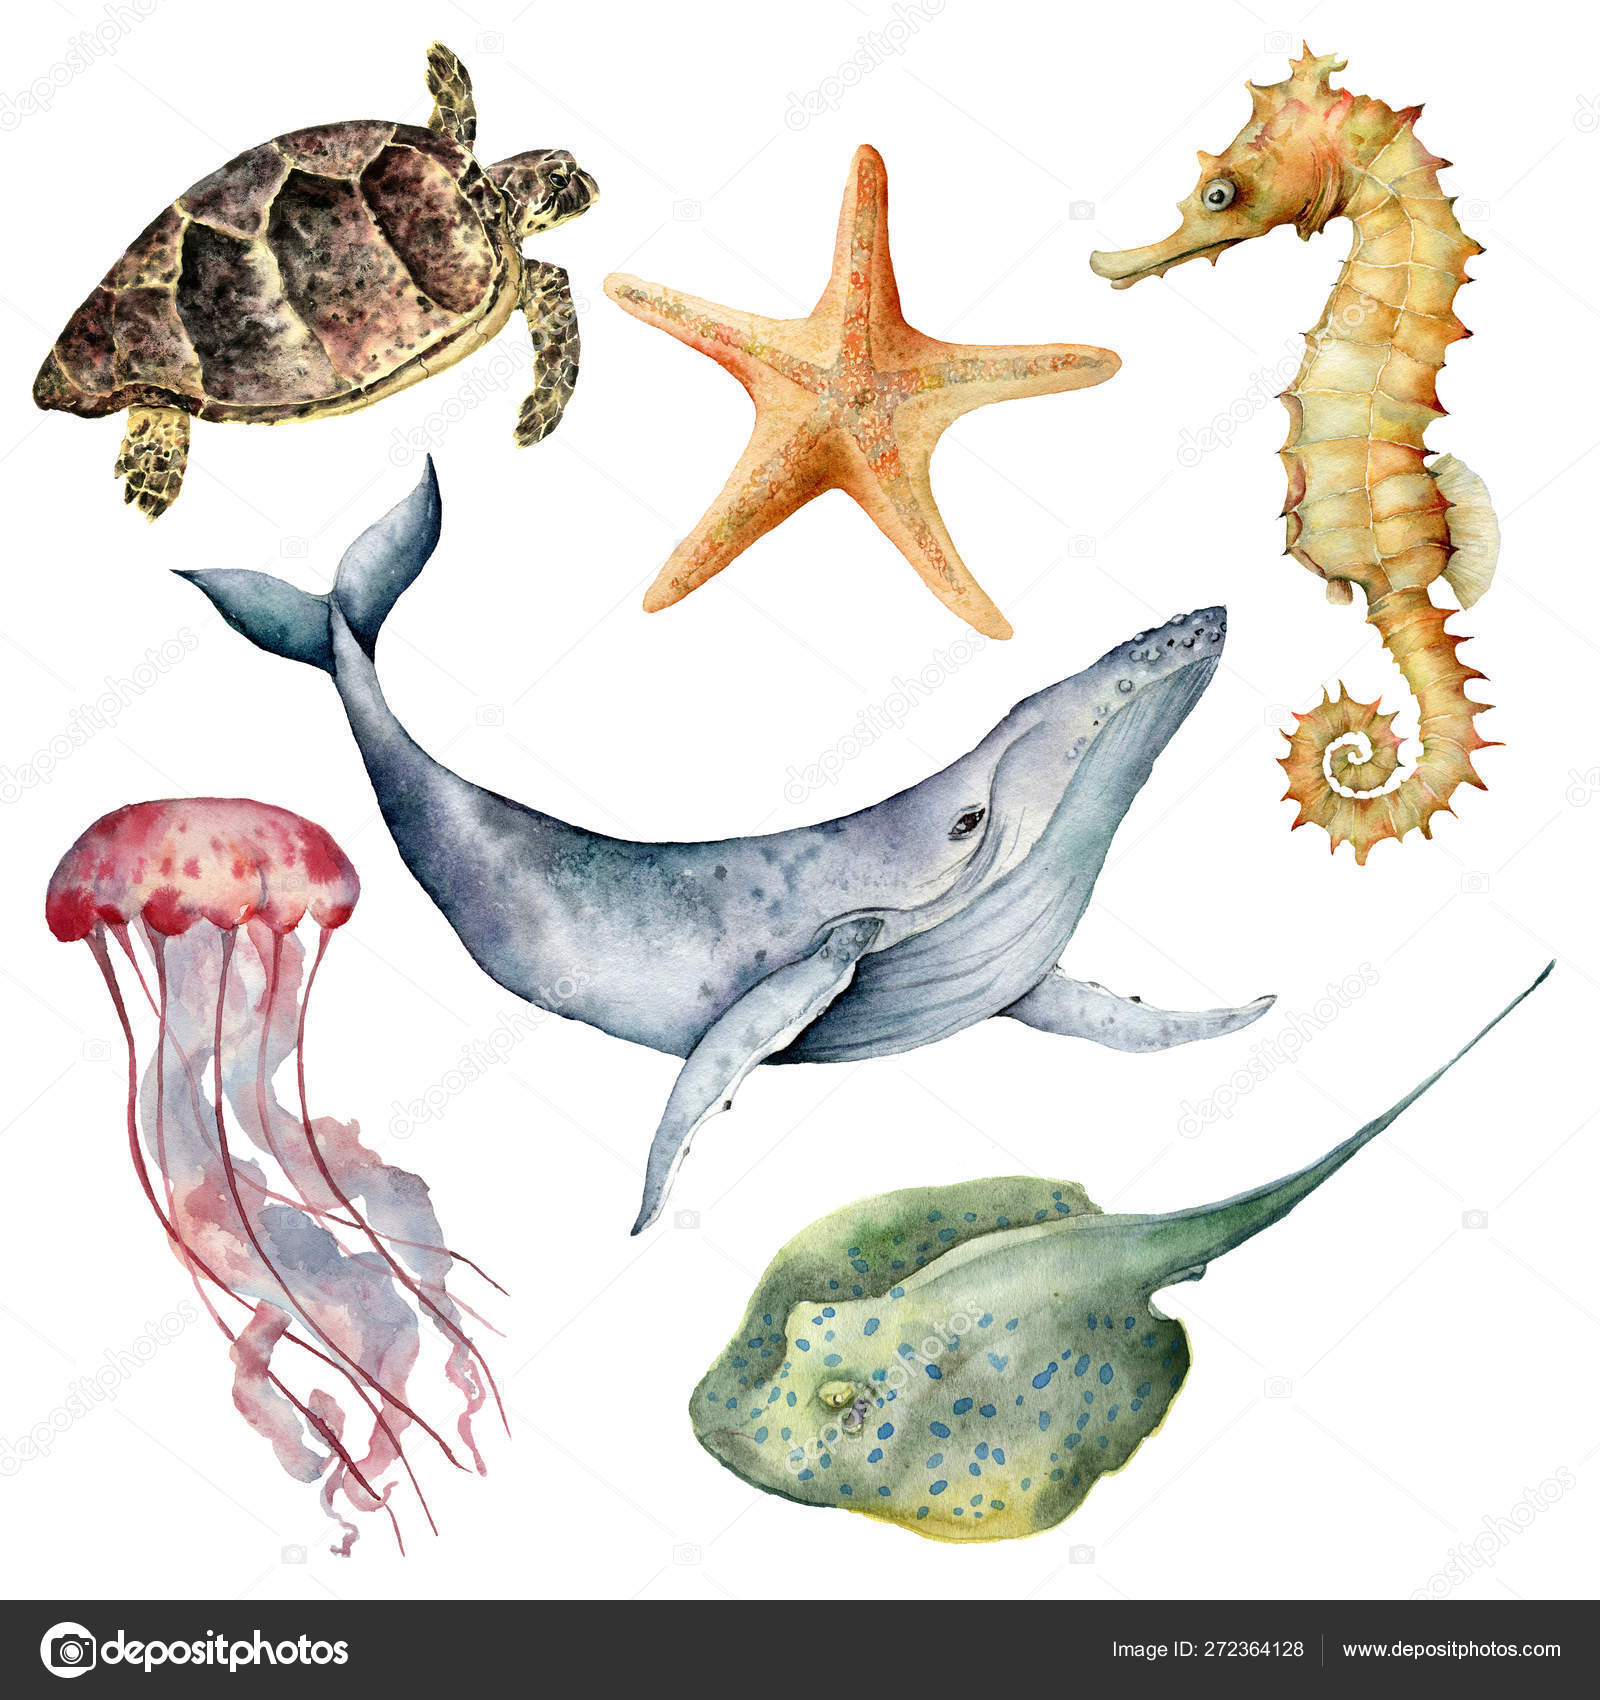 Watercolor underwater animals set. Hand painted whale, starfish, seahorse,  stingray, jellyfish and turtle isolated on white background. Aquatic  illustration for design, print or background. Stock Photo by ©Derbisheva  272364128